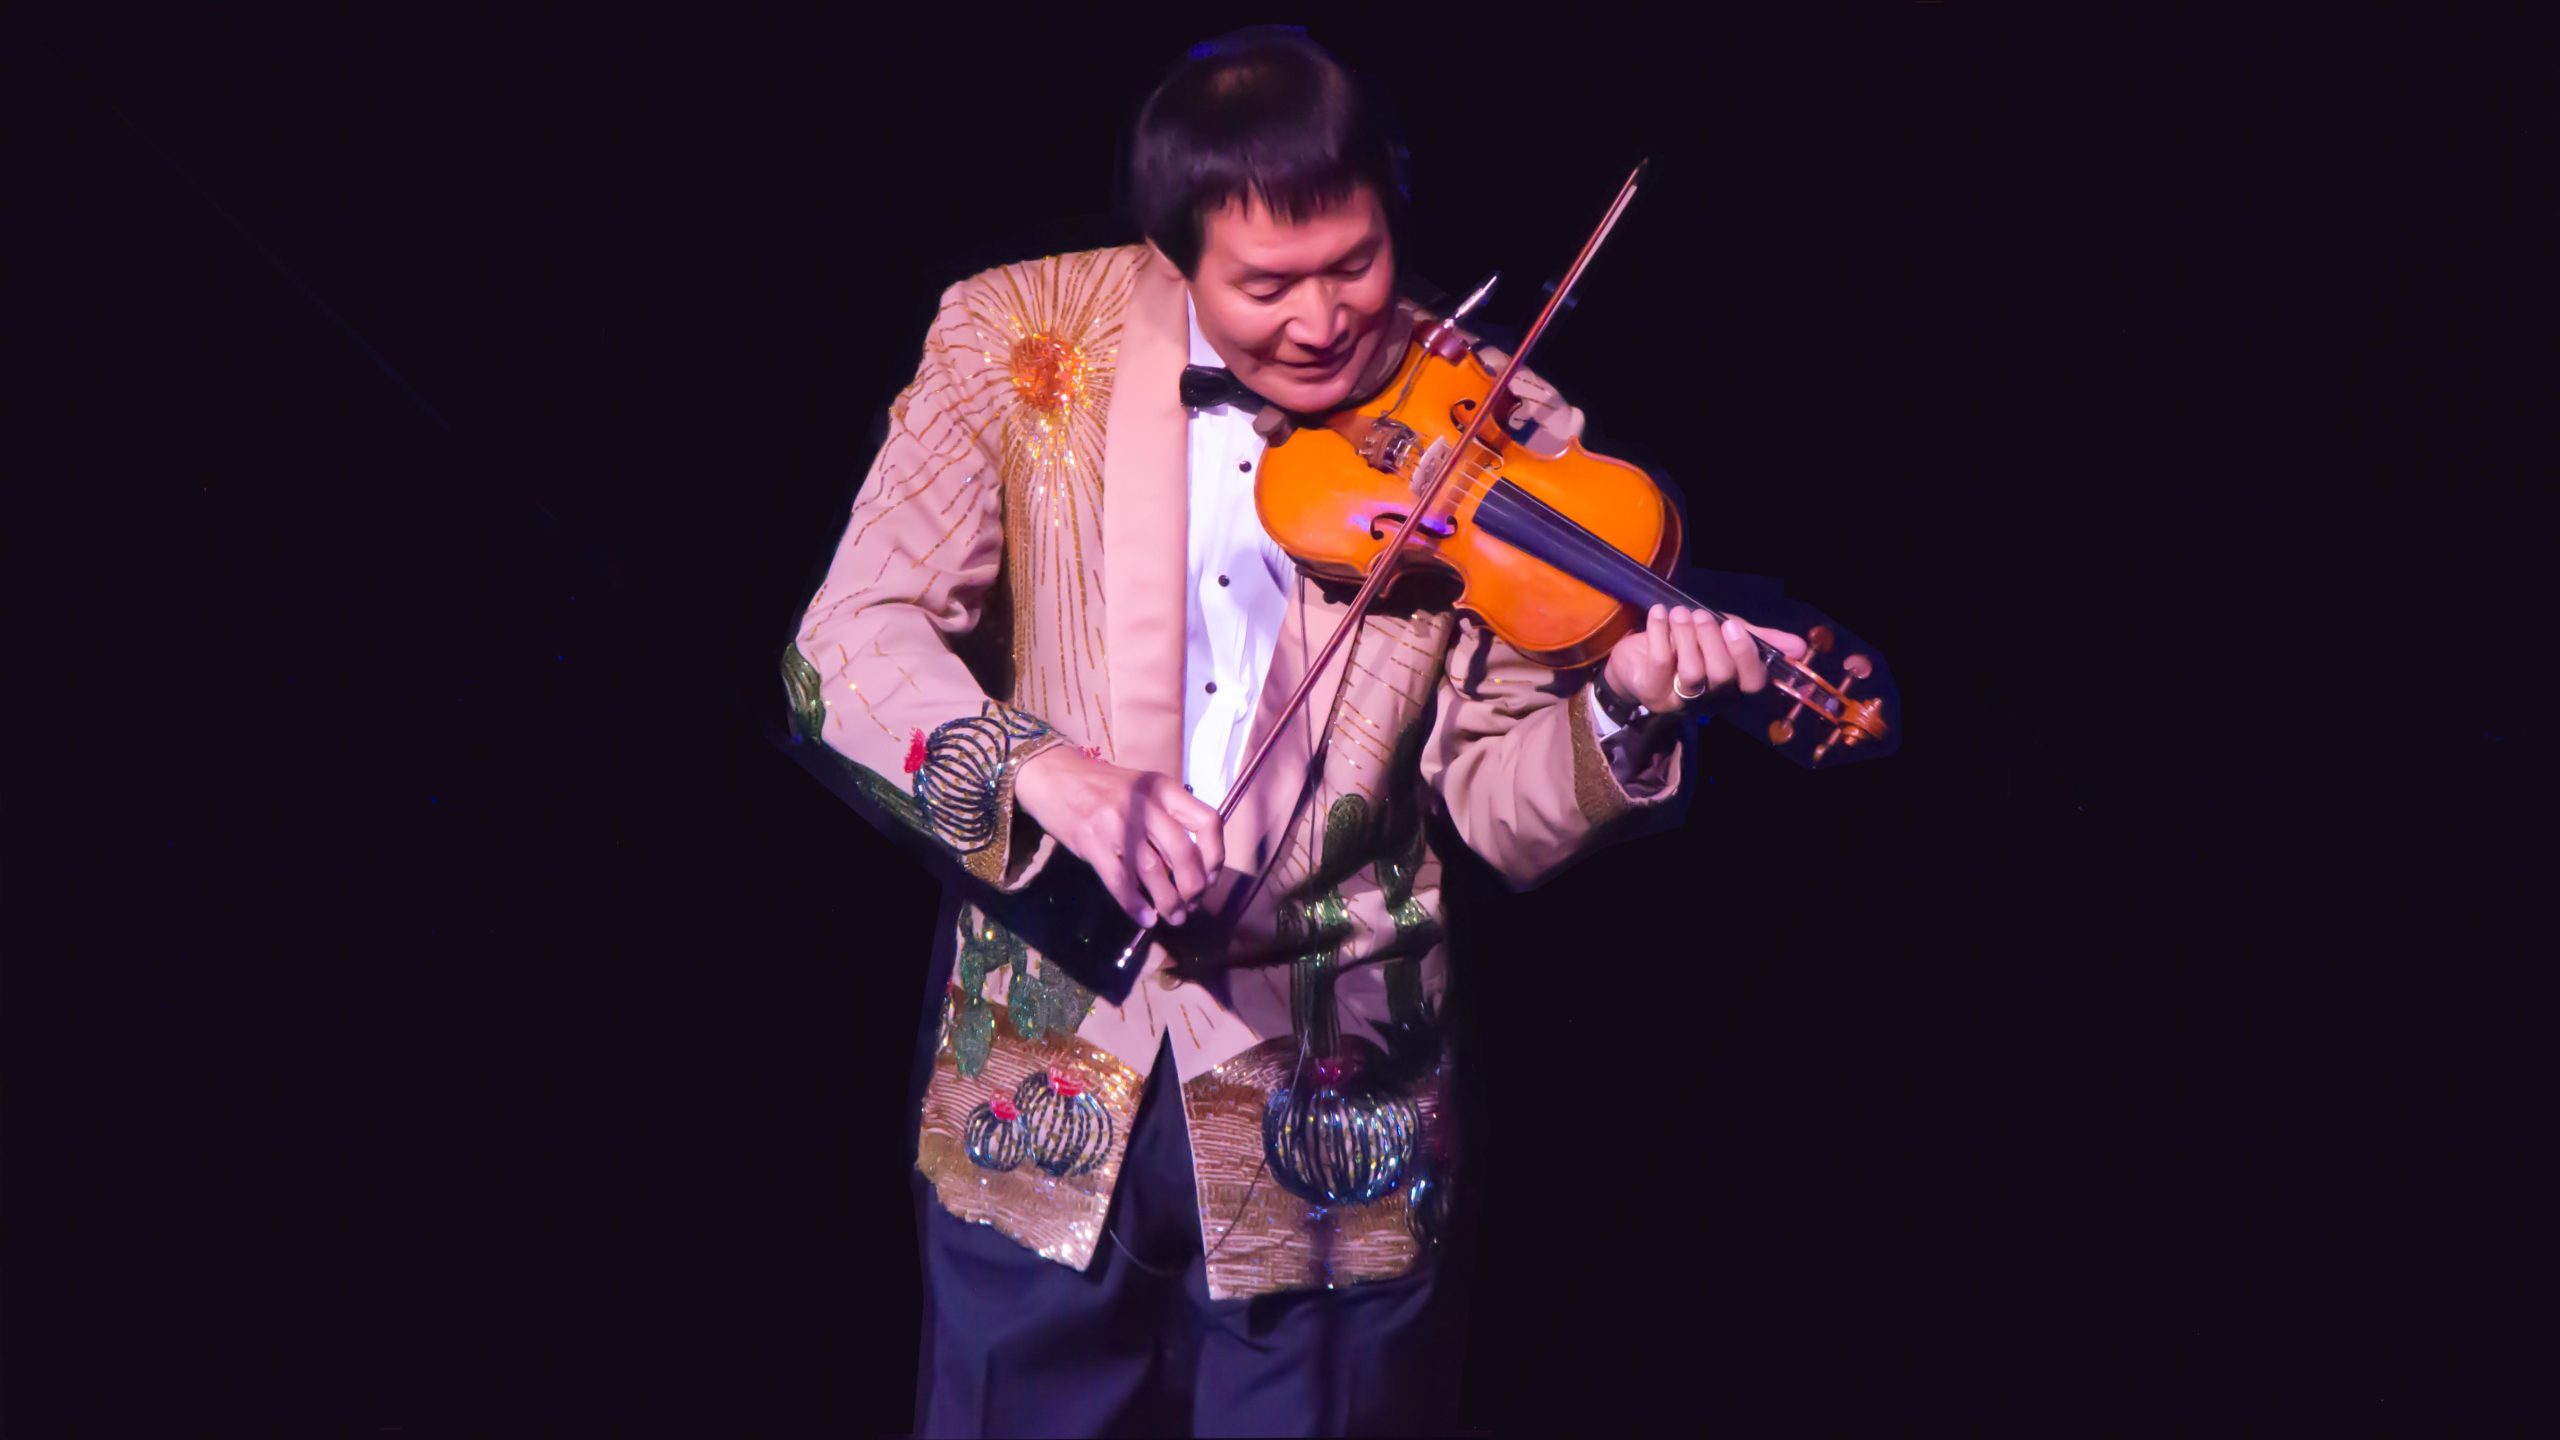 160615 Shoji Tabuchi Fiddle scaled - The Journey of the Incredible Shoji Tabuchi - In his own words